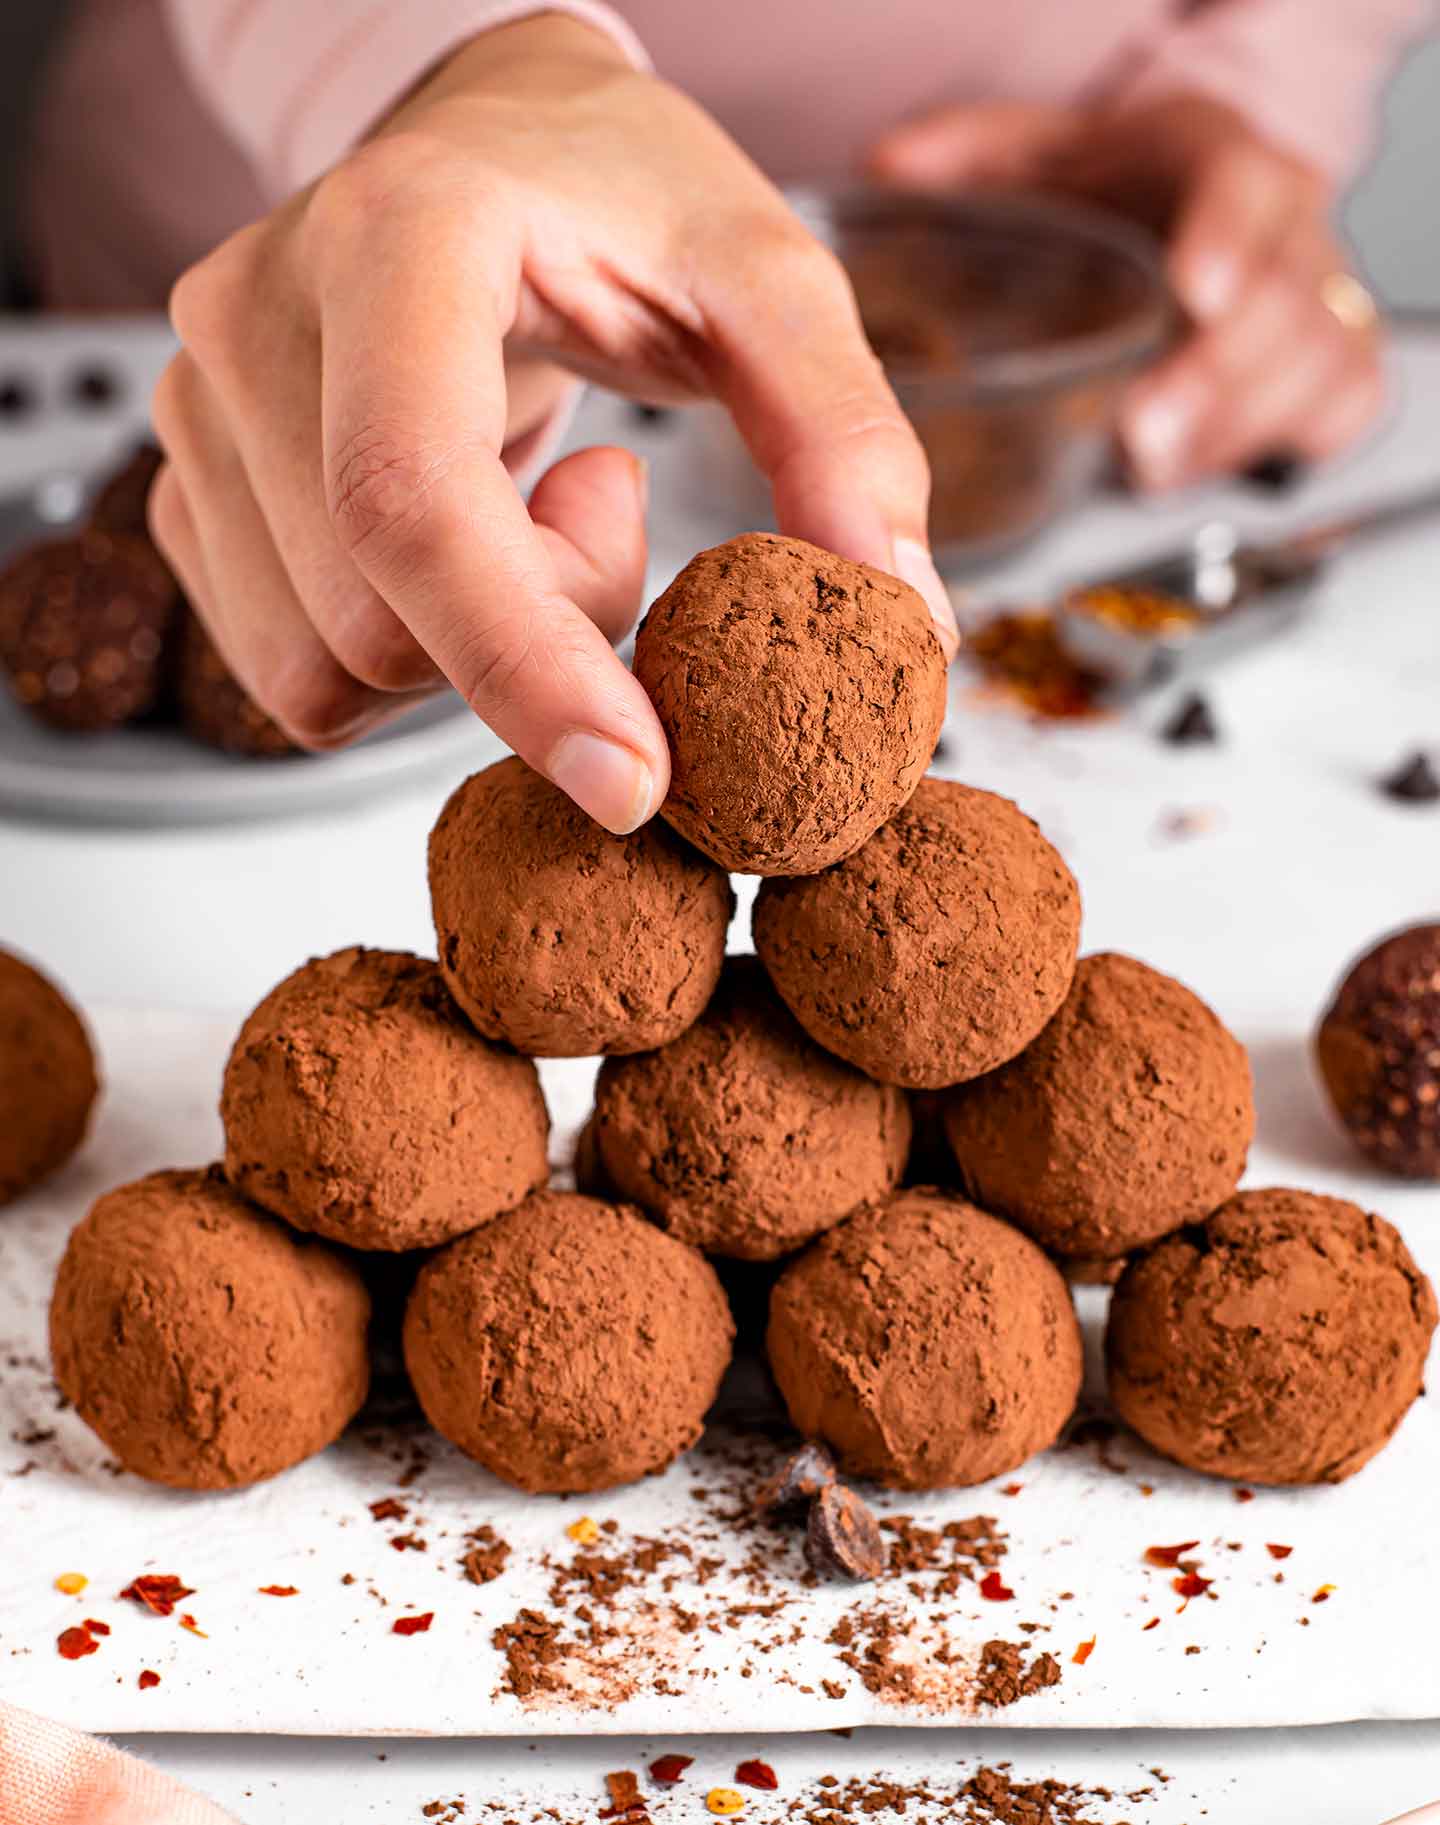 Side view of a diamond shaped stack of truffle chili energy balls. Fingers reach fro the top ball. Cocoa powder and chocolate chips are scattered around.